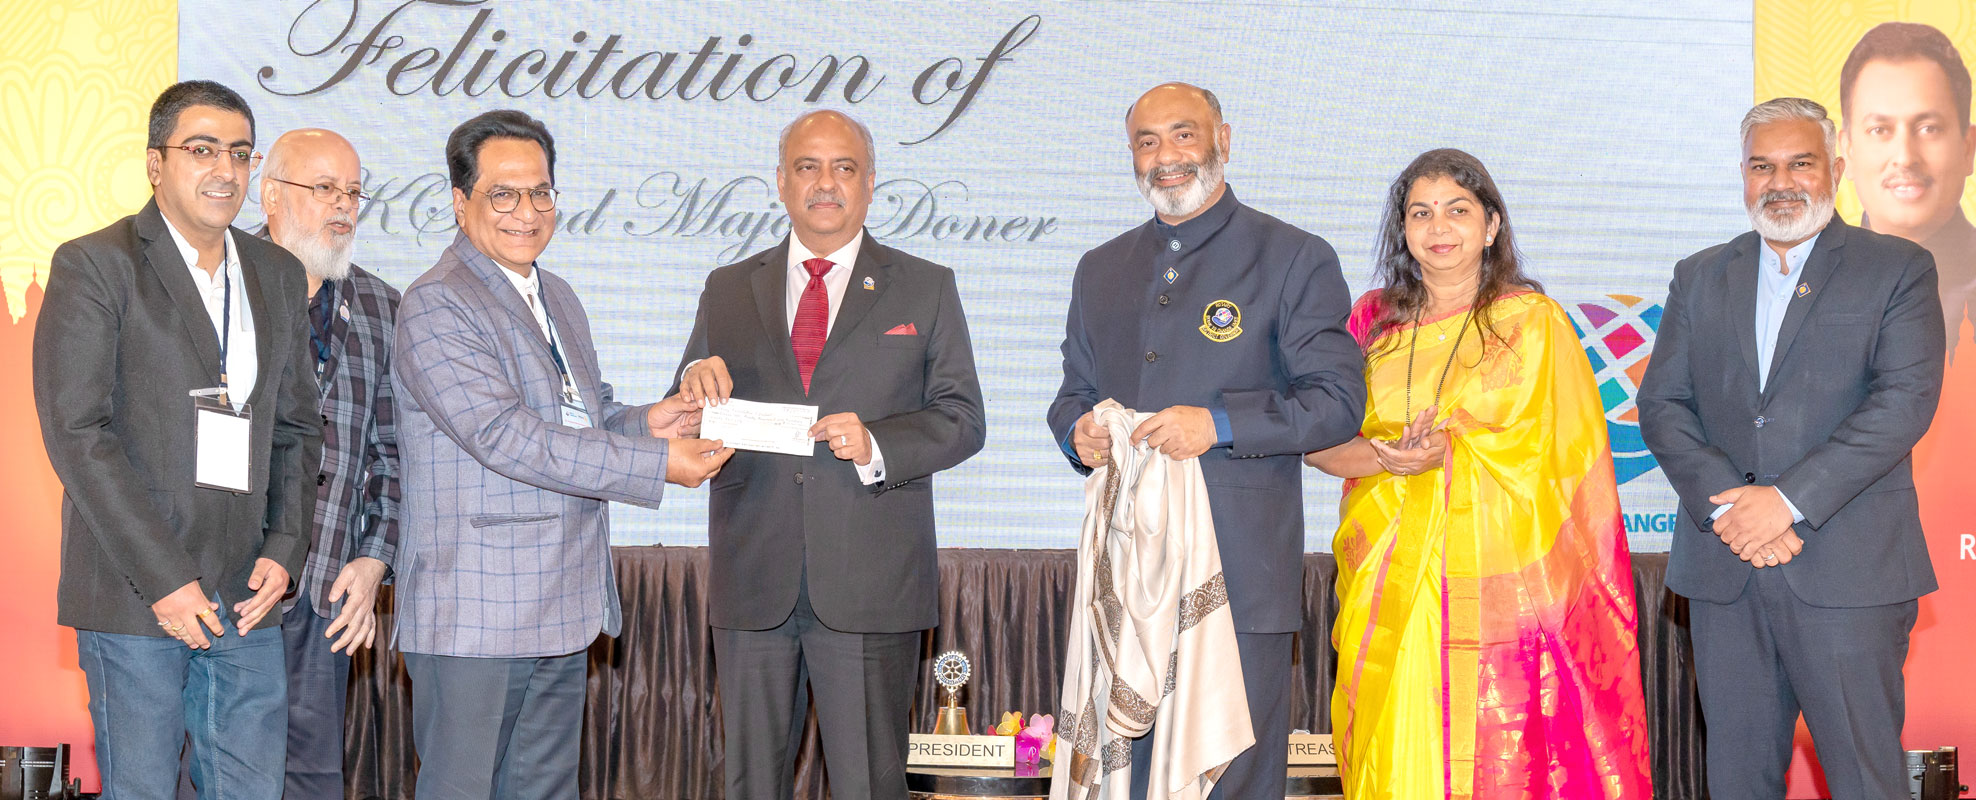 Rtn Kishor Lulla hands over a cheque to President Mehta to complete his AKS commitment in the presence of (from L) Amit Lulla, PDG Vinay Raikar, DG Gaurish and Pratima Dhond, and district secretary Ajay Menon.